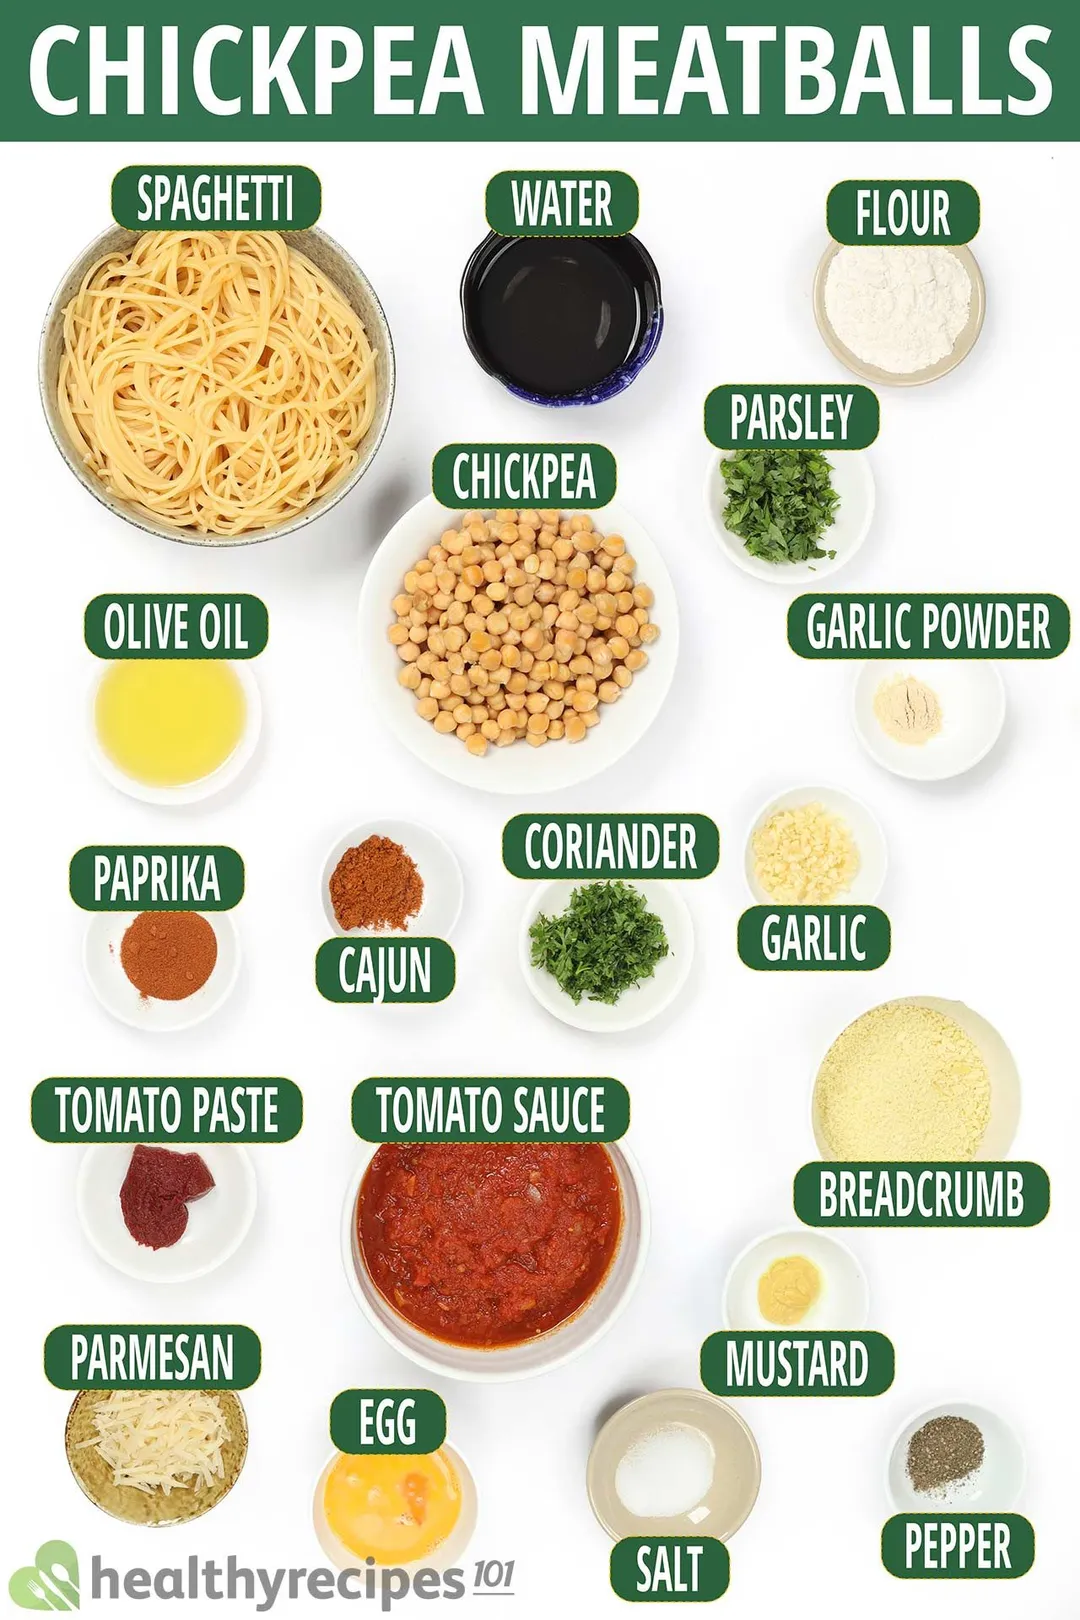 Ingredient for chickpea meatballs, including a bowl of chickpeas, a bowl of cooked spaghetti, tomato sauce, and various ingredients.